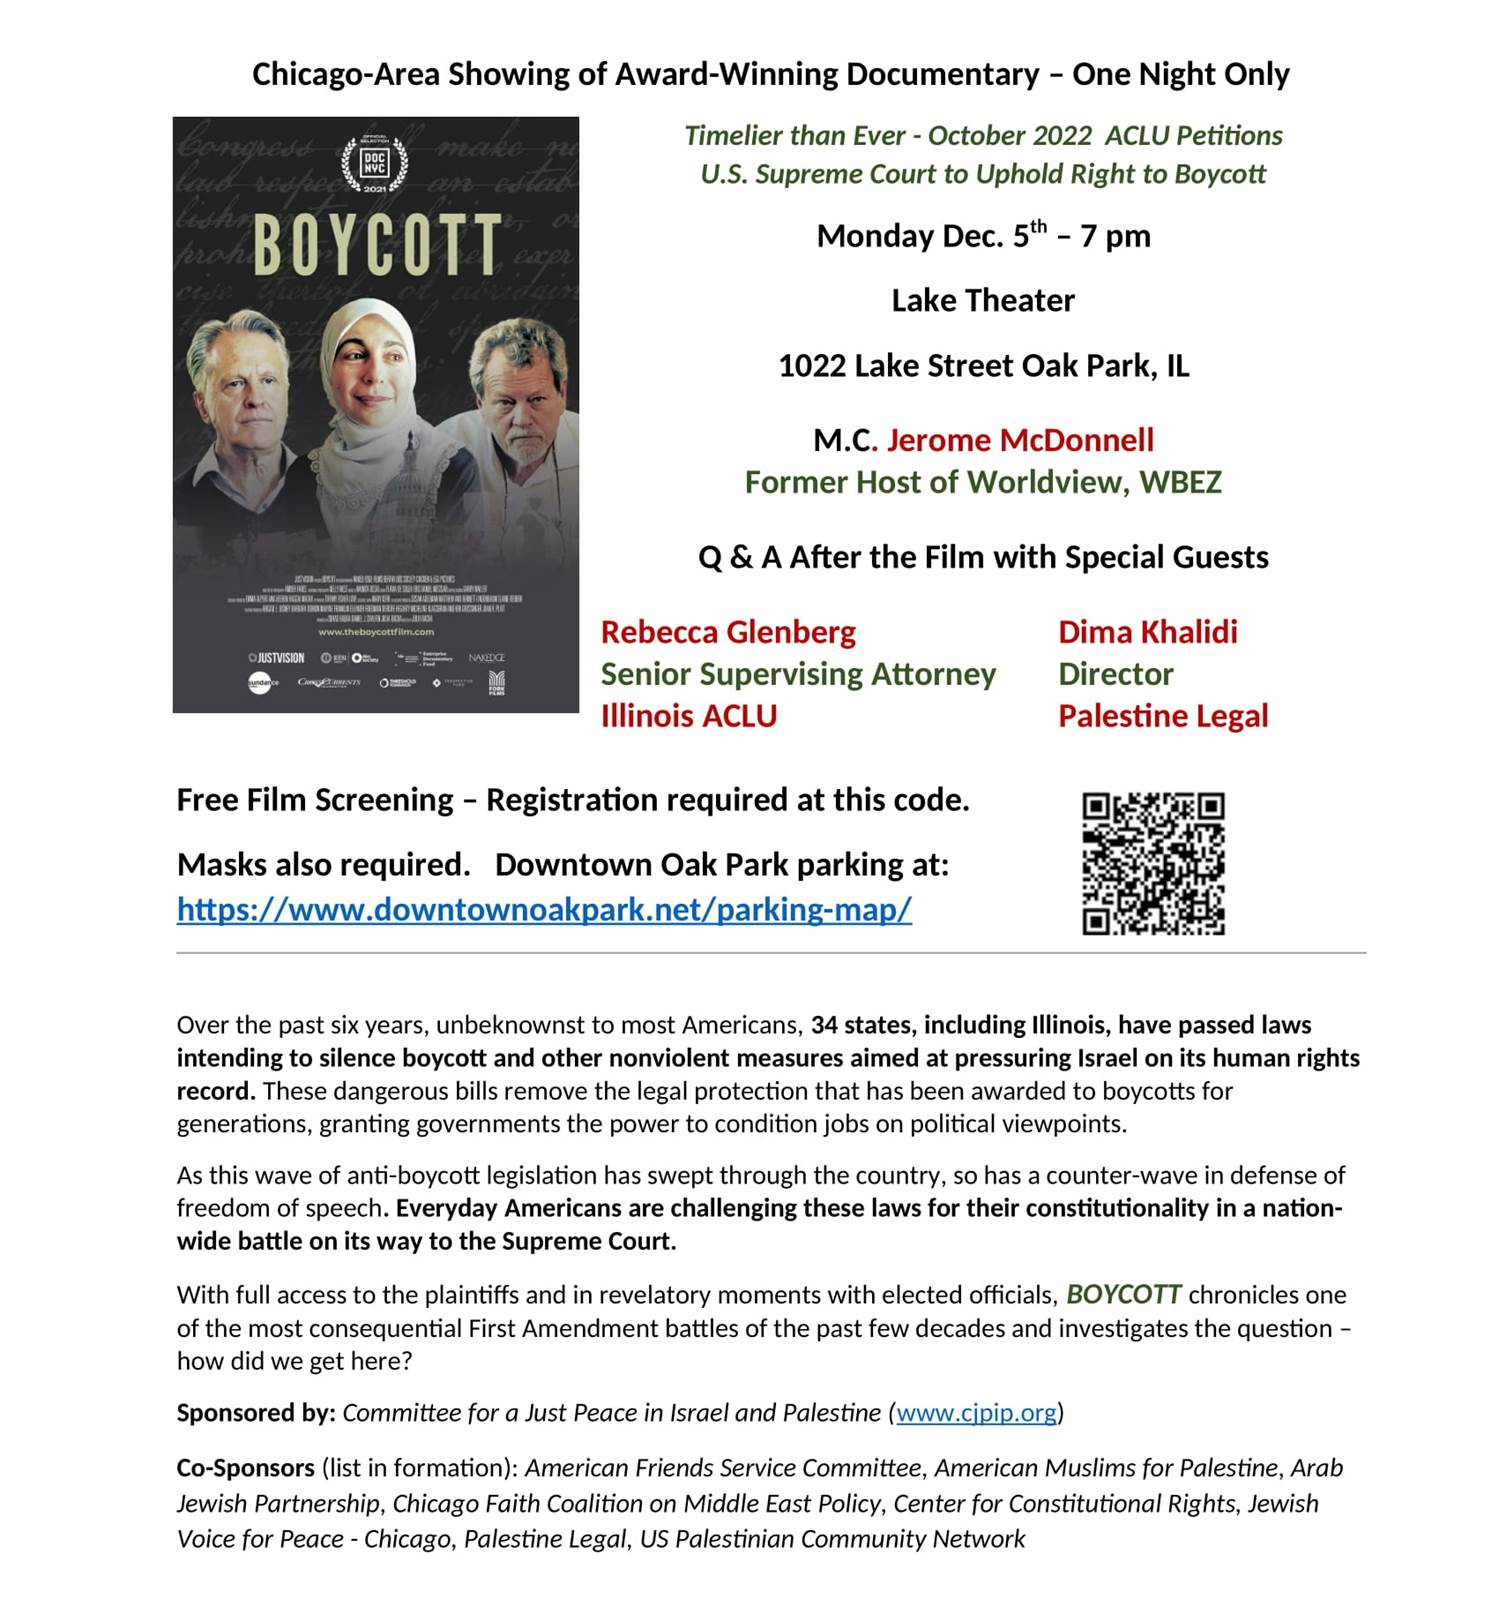 Boycott - the 2021 Award Winning Documentary. When a news publisher in Arkansas, an attorney in Arizona, and a speech therapist in Texas are told they must choose between their jobs and their political beliefs, they launch legal battles that expose an attack on freedom of speech across 33 states in America. Boycott traces the impact of state legislation designed to penalize individuals and companies that choose to boycott Israel due to its human rights record. A legal thriller with accidental plaintiffs at the center of the story, Boycott is a bracing look at the far-reaching implications of anti-boycott legislation and an inspiring tale of everyday Americans standing up to protect our rights in an age of shifting politics and threats to freedom of speech.  Come see the Chicago showing of this award winning documentary and have a chance to ask questions of legal experts following the film.